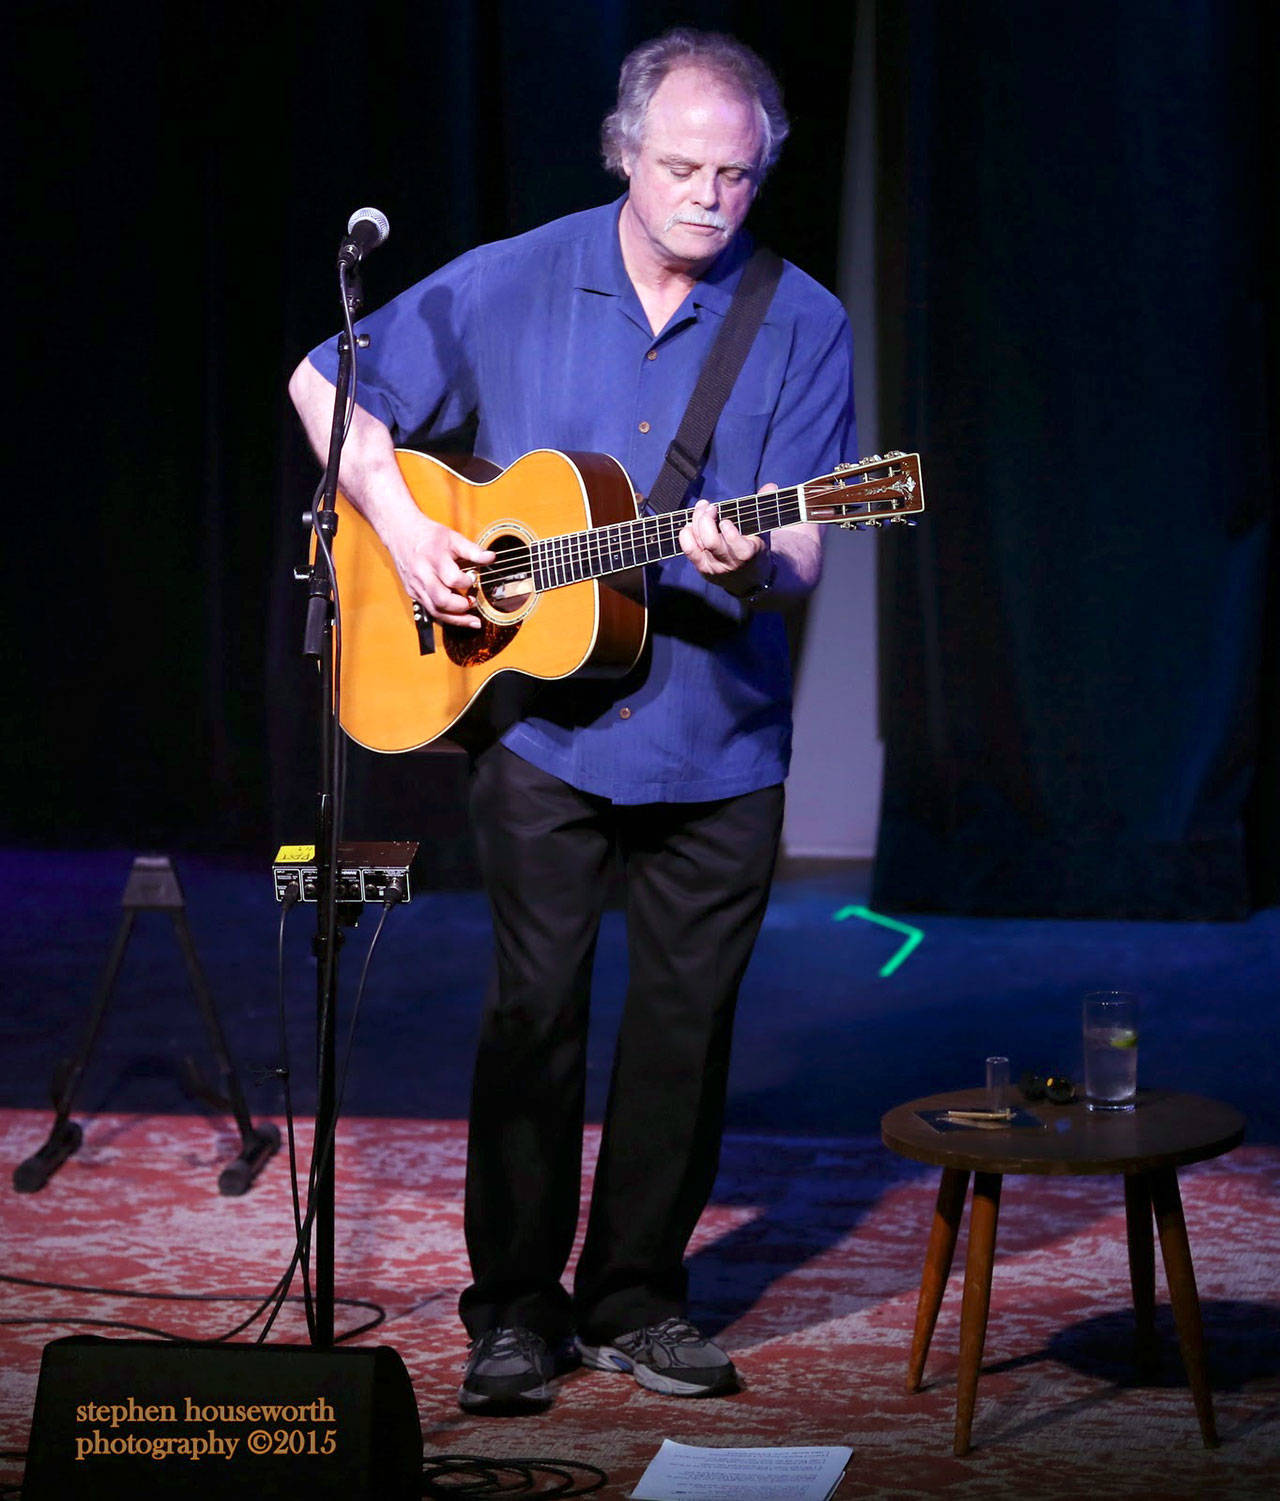 Pat Donohue will fingerpick in a performance in Port Townsend this evening.